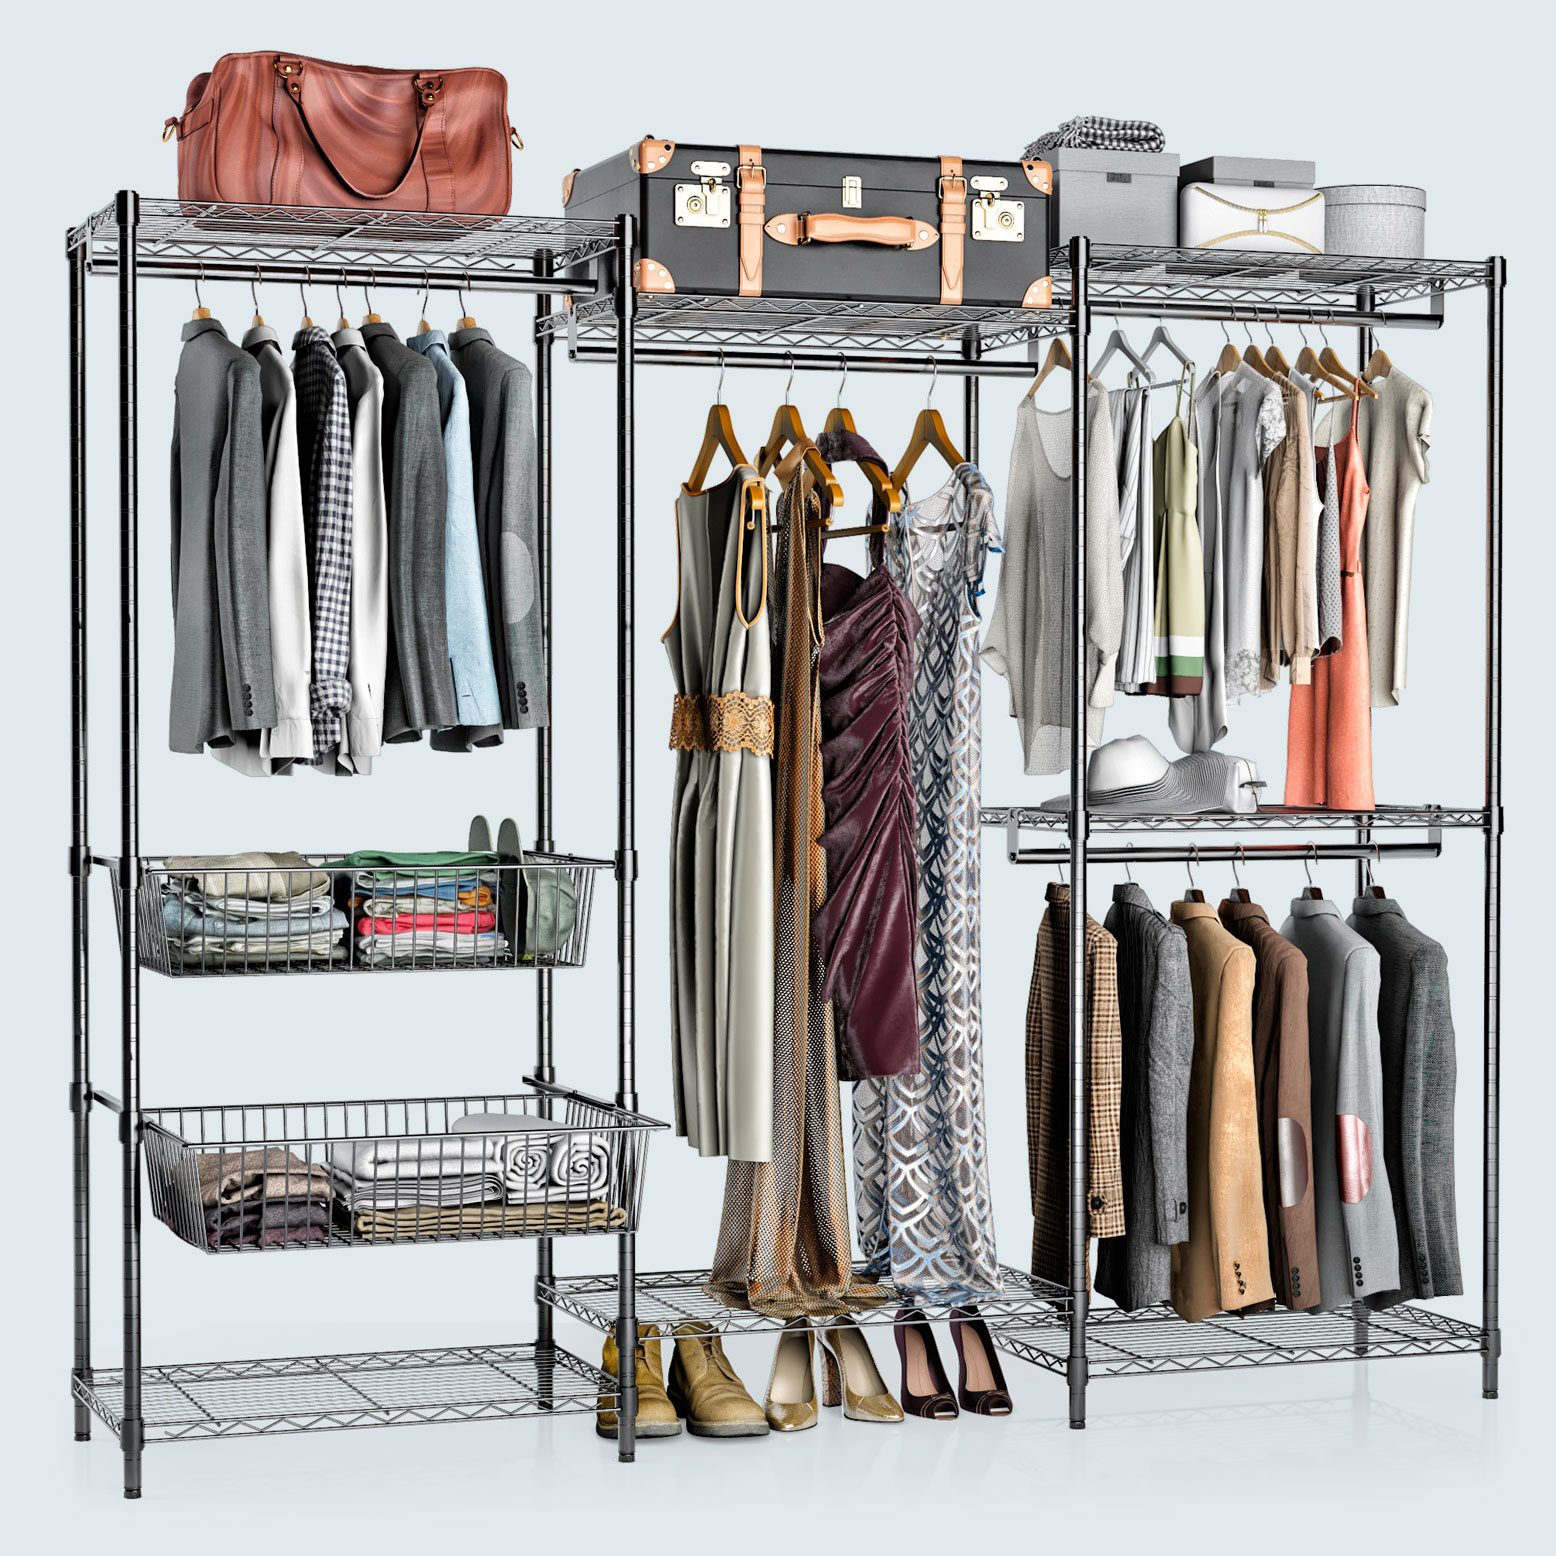 5 Best Portable Closets for Every Storage Space Needs